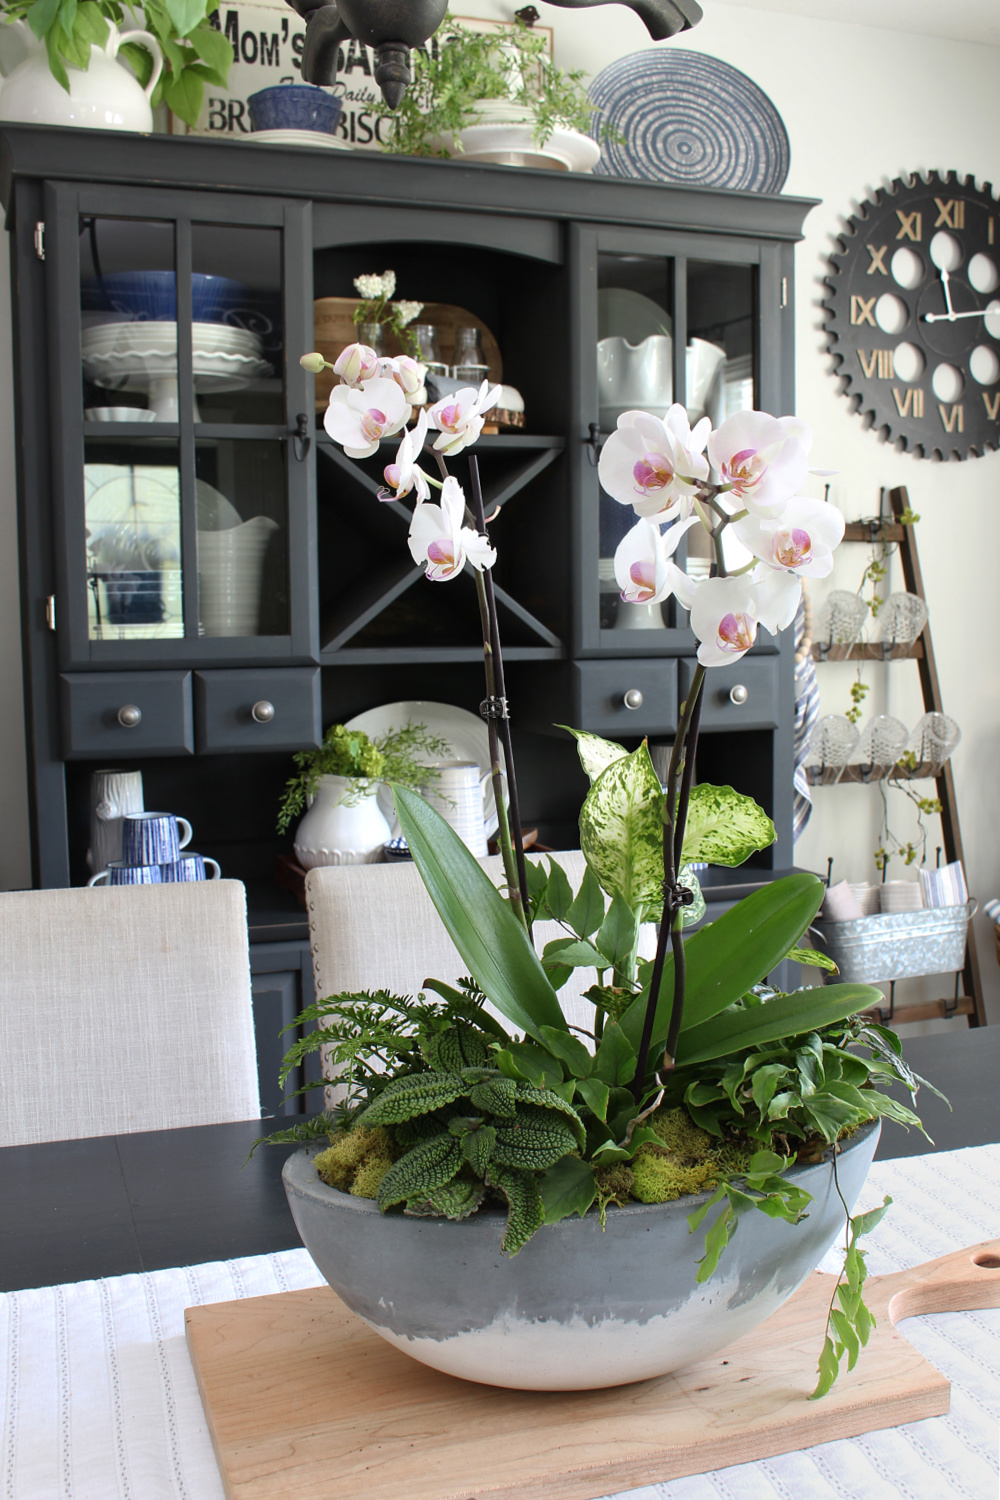 DIY orchid planter centerpiece for a summer dining room.